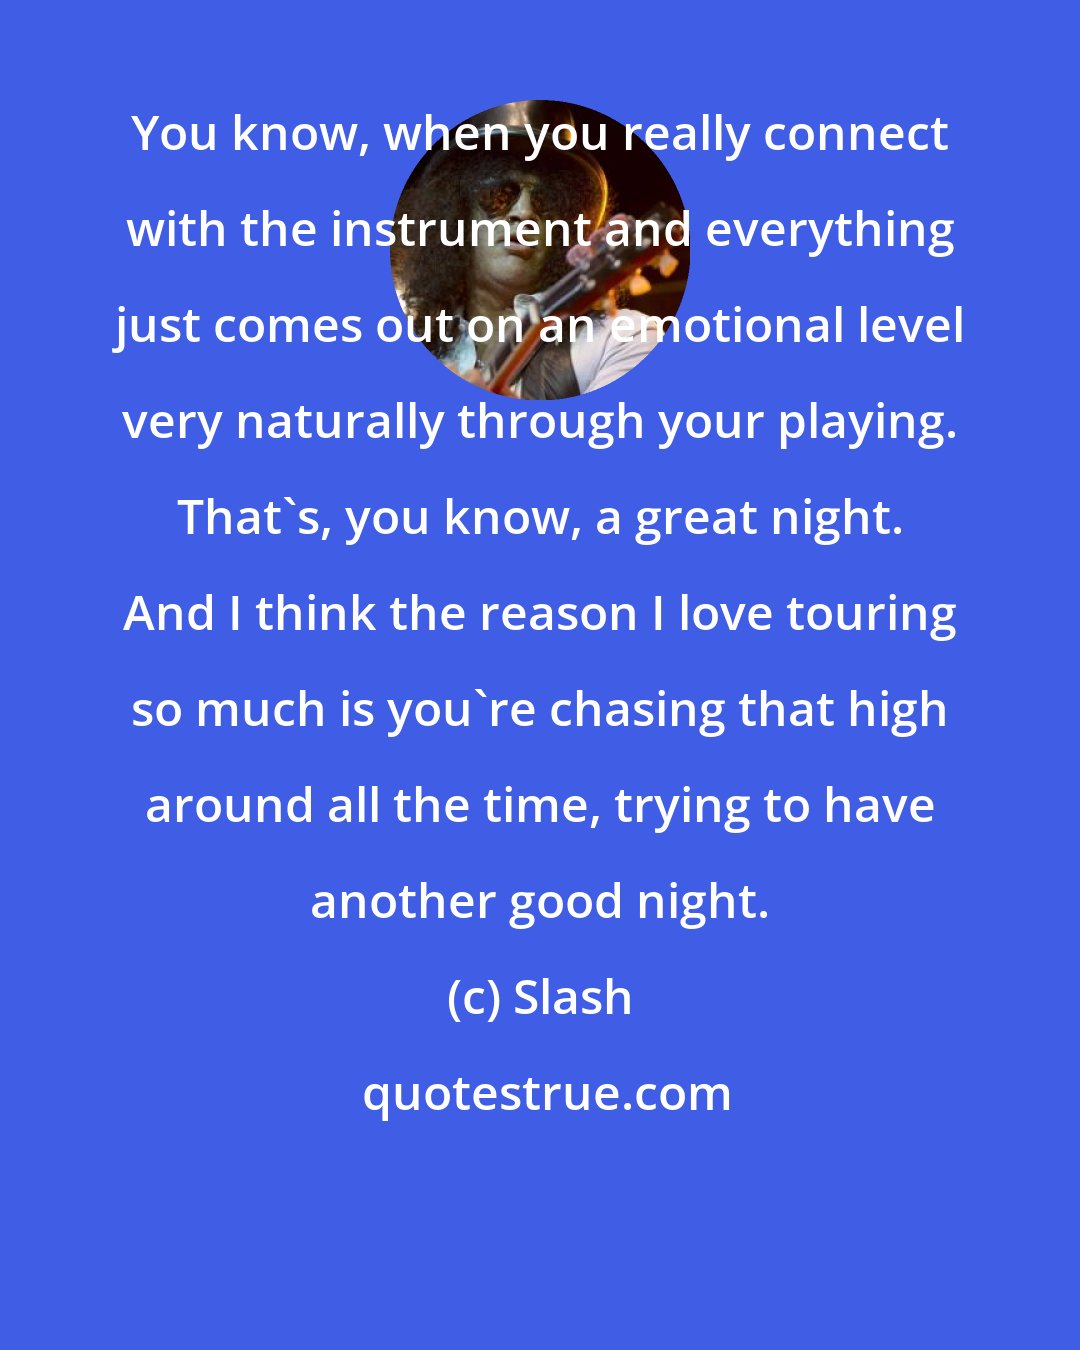 Slash: You know, when you really connect with the instrument and everything just comes out on an emotional level very naturally through your playing. That's, you know, a great night. And I think the reason I love touring so much is you're chasing that high around all the time, trying to have another good night.